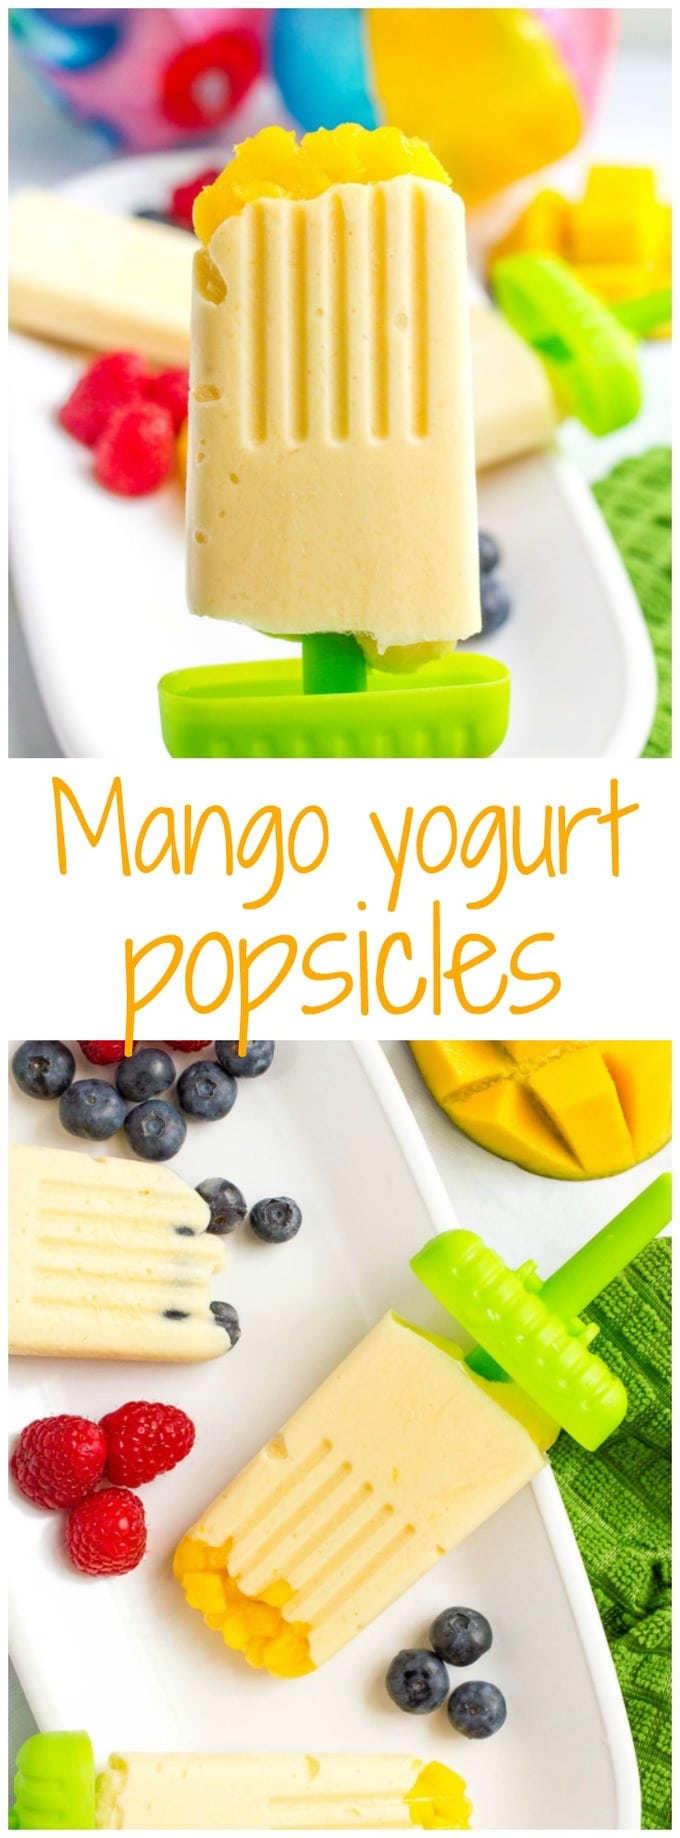 Mango yogurt popsicles - easy homemade popsicles with just 5 healthy ingredients - perfect summer treat!